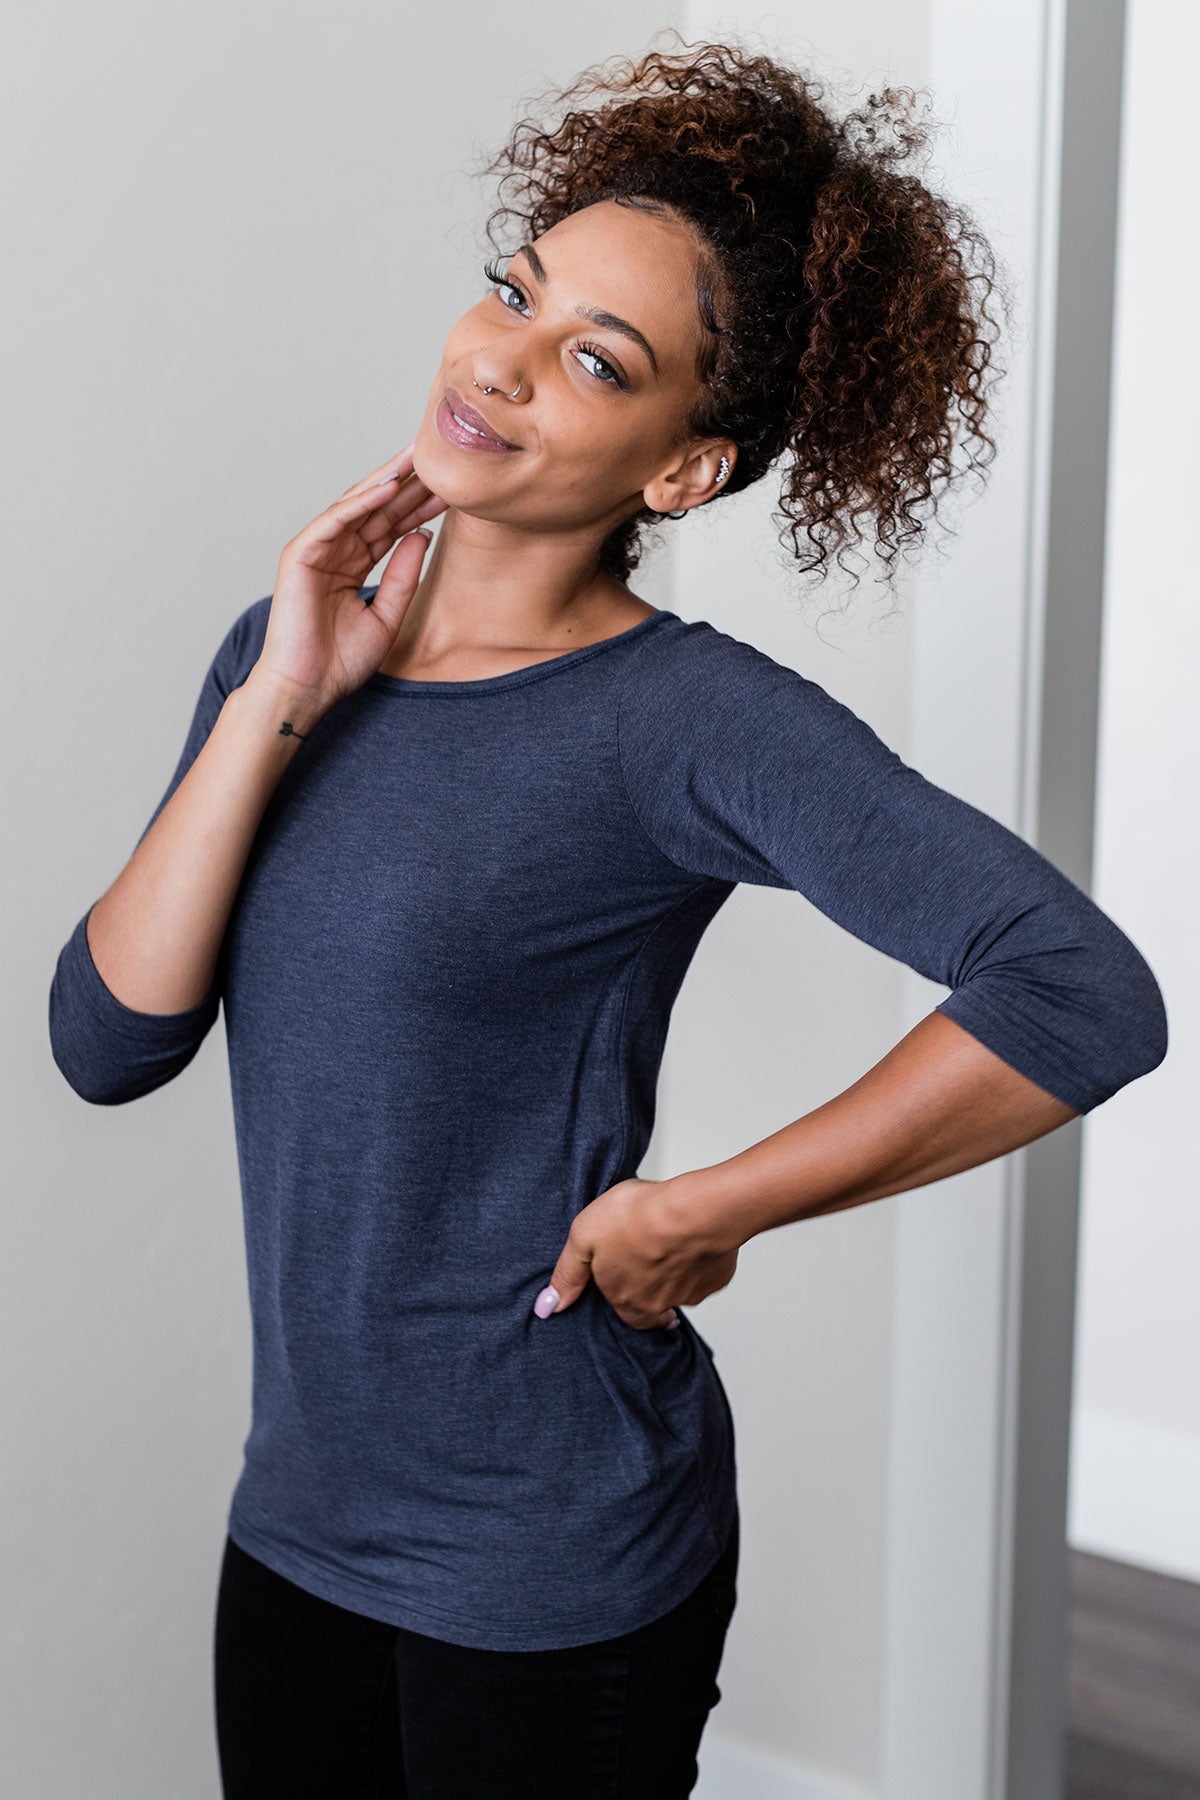 A woman standing with one hand on her hip and one hand on her chin, wearing Yala Kai Boatneck Three Quarter Sleeve Relaxed Fit Bamboo Tee Shirt in Navy Melange